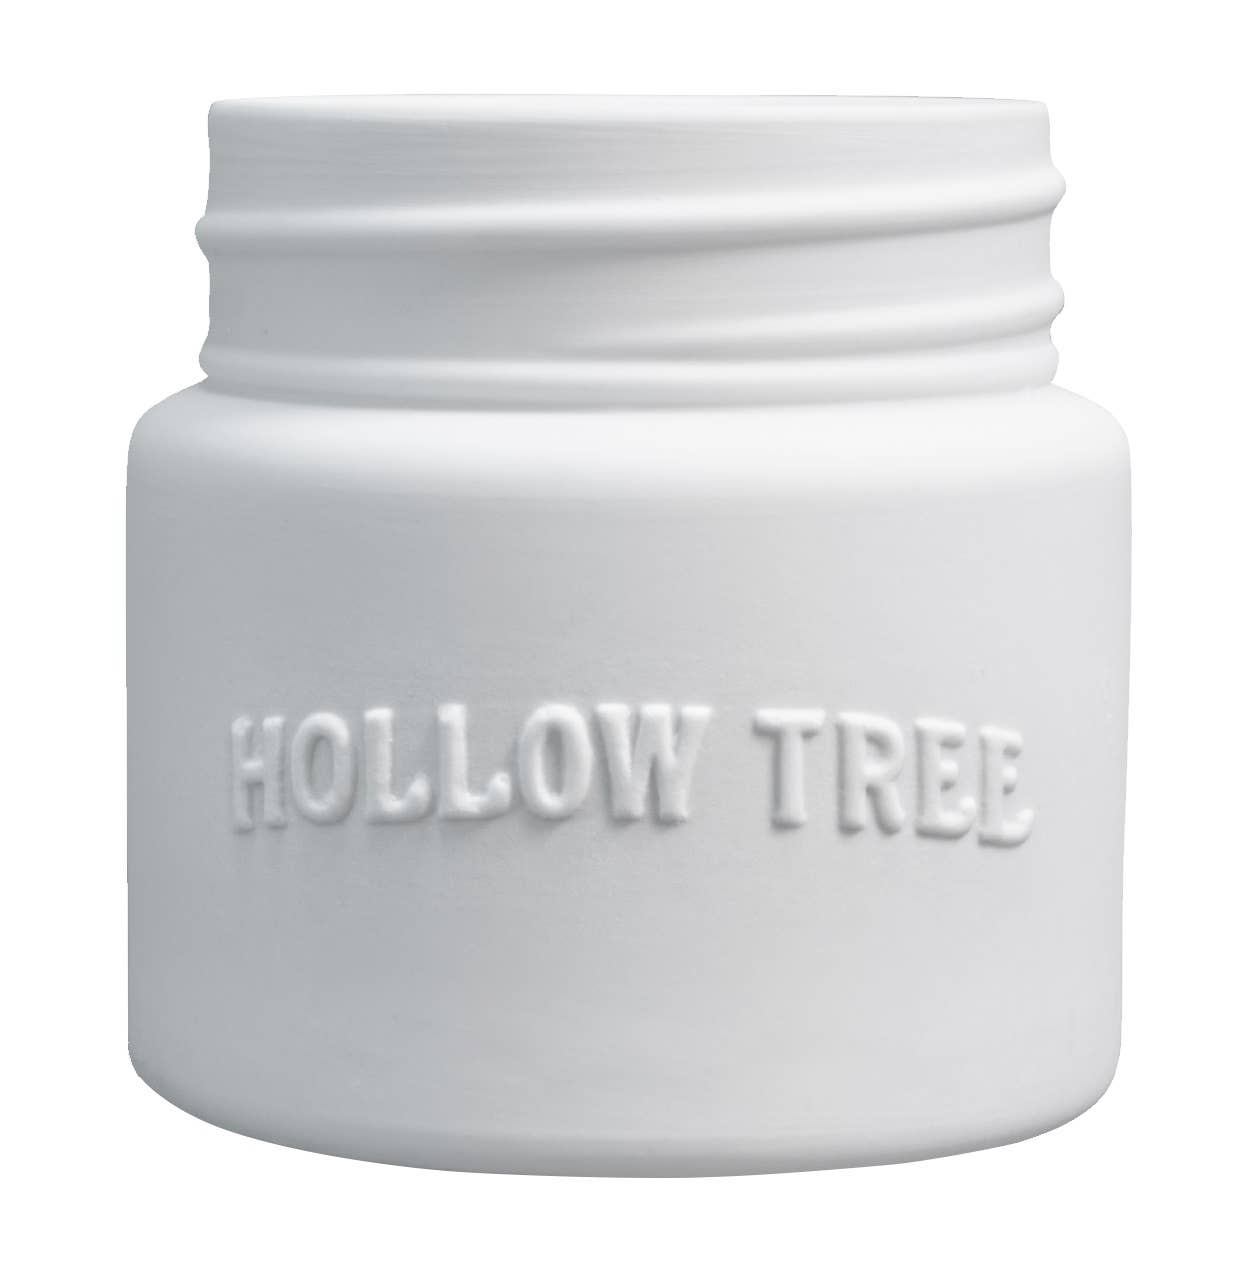 Hollow Tree Fireweed Scented Candle - Osmology Scented Candles & Home Fragrance